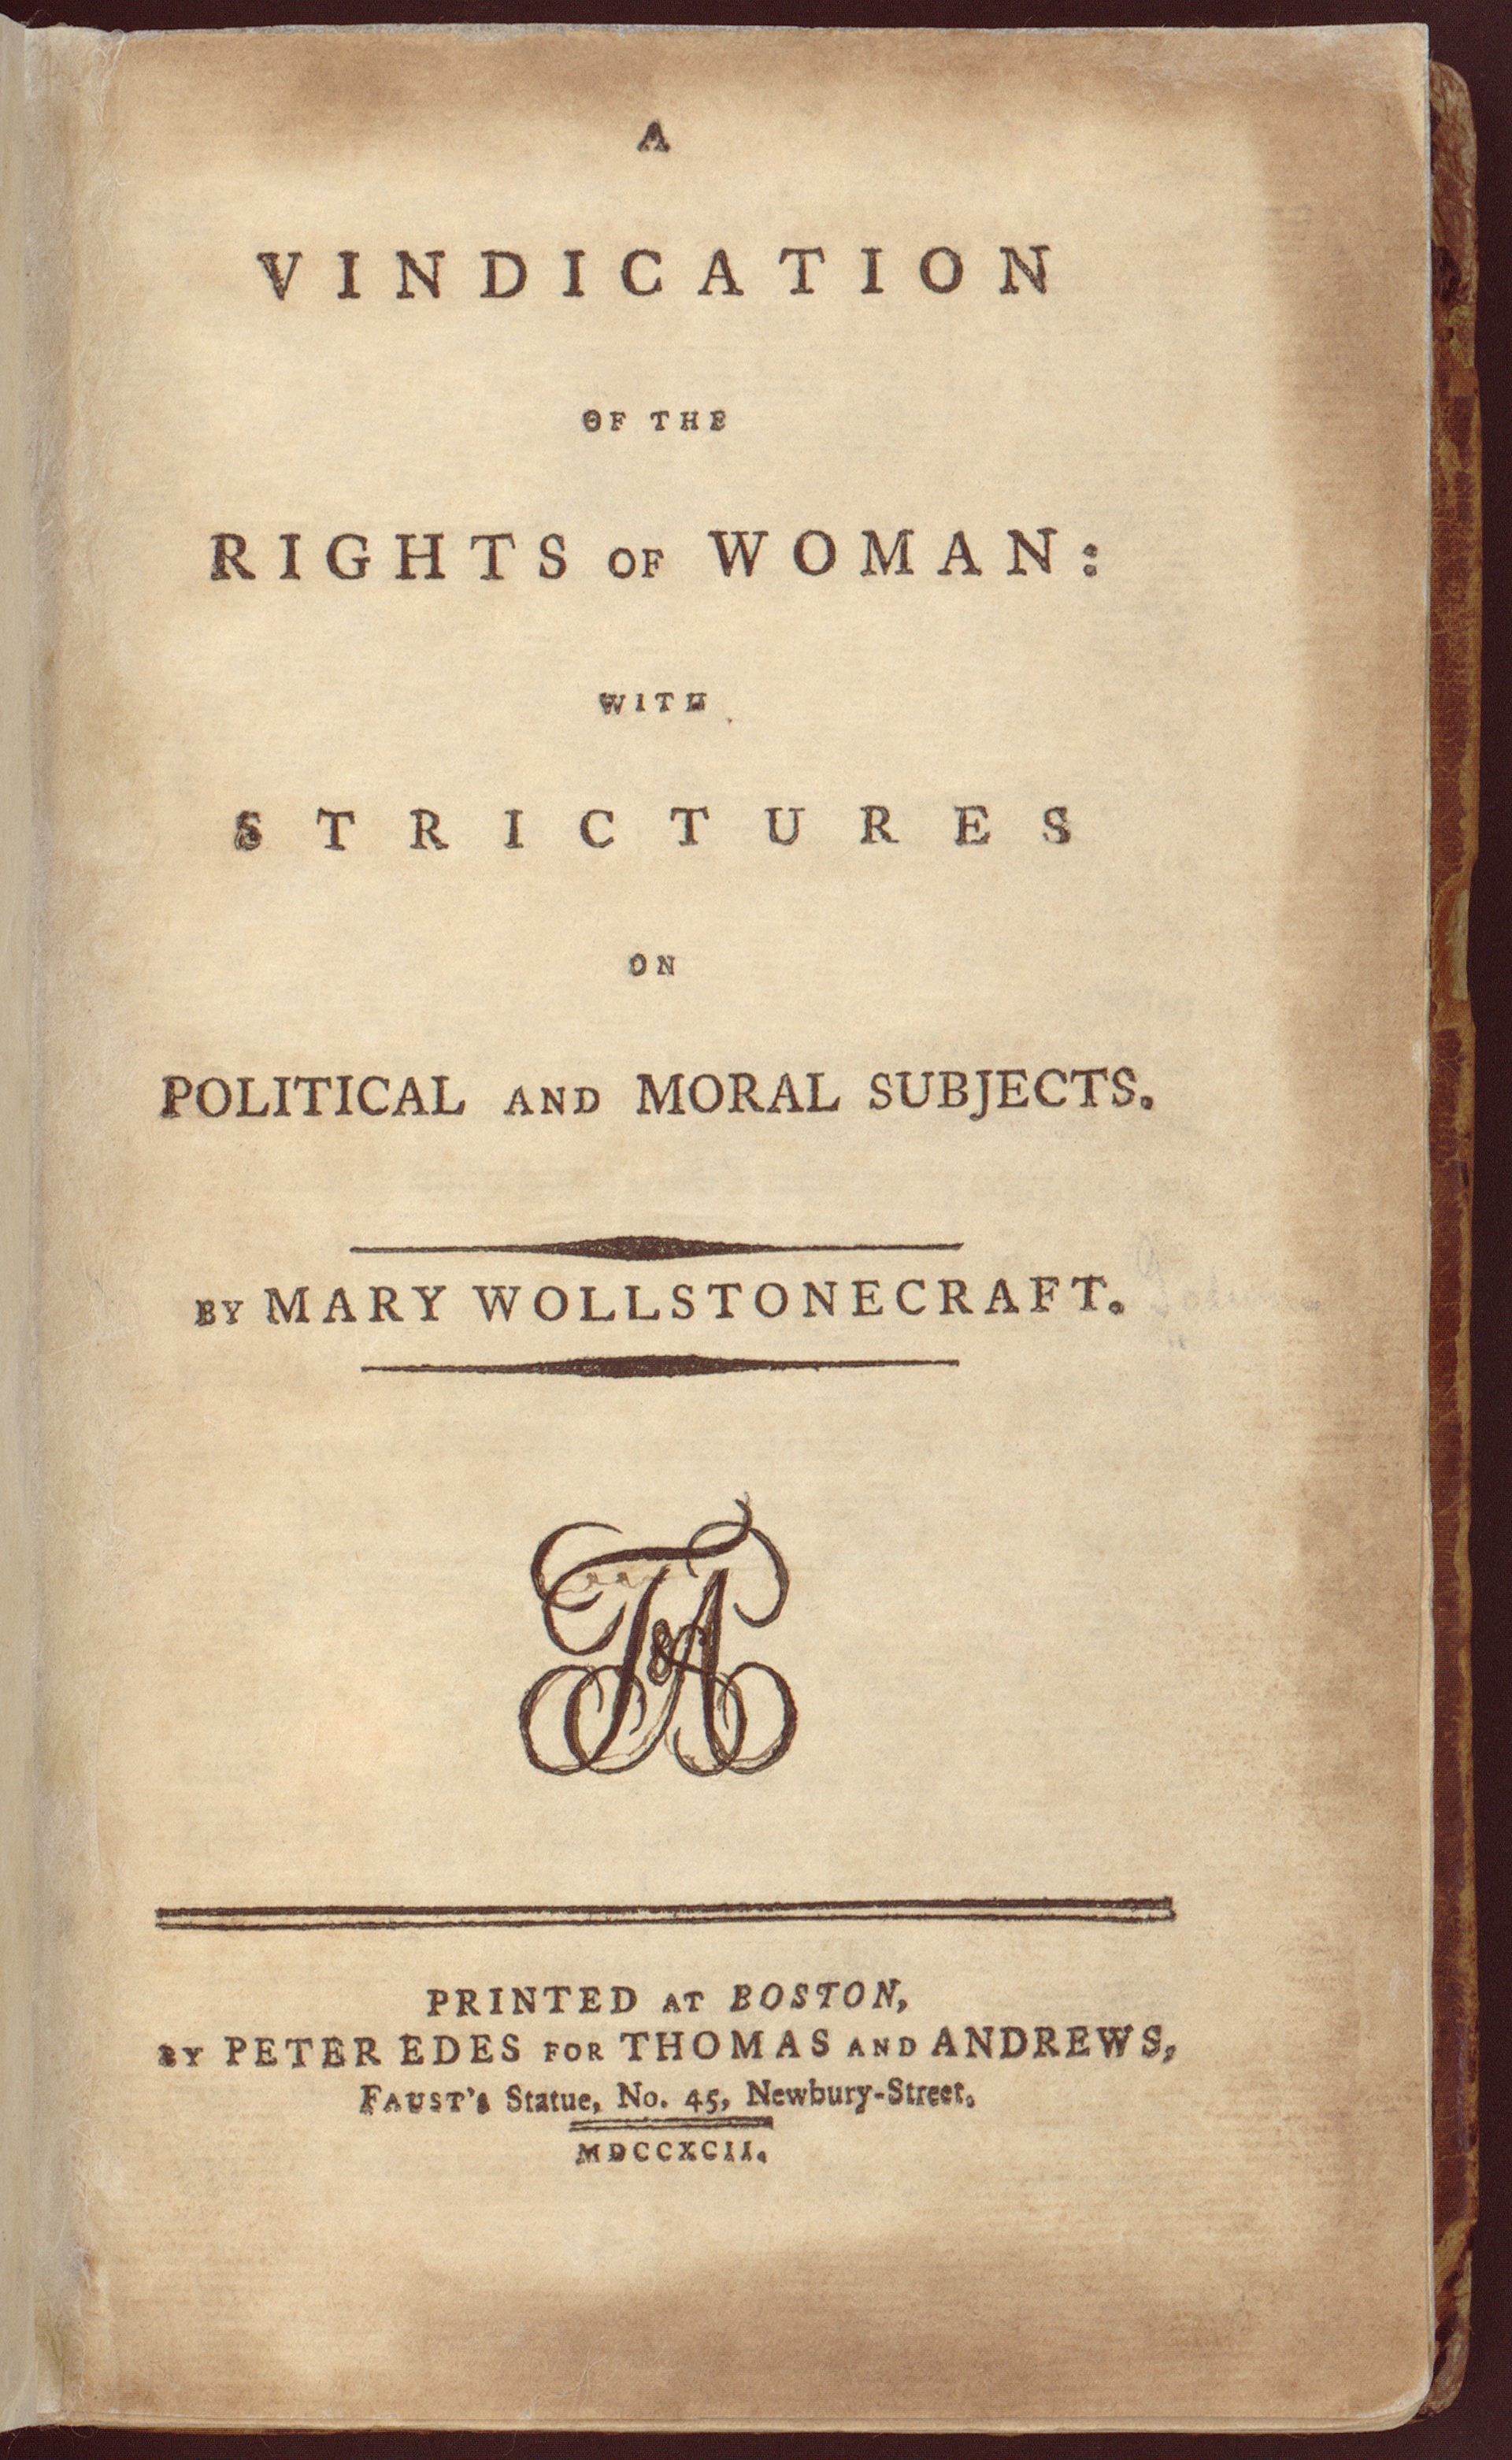 The title page of A Vindication of the Rights of Woman.